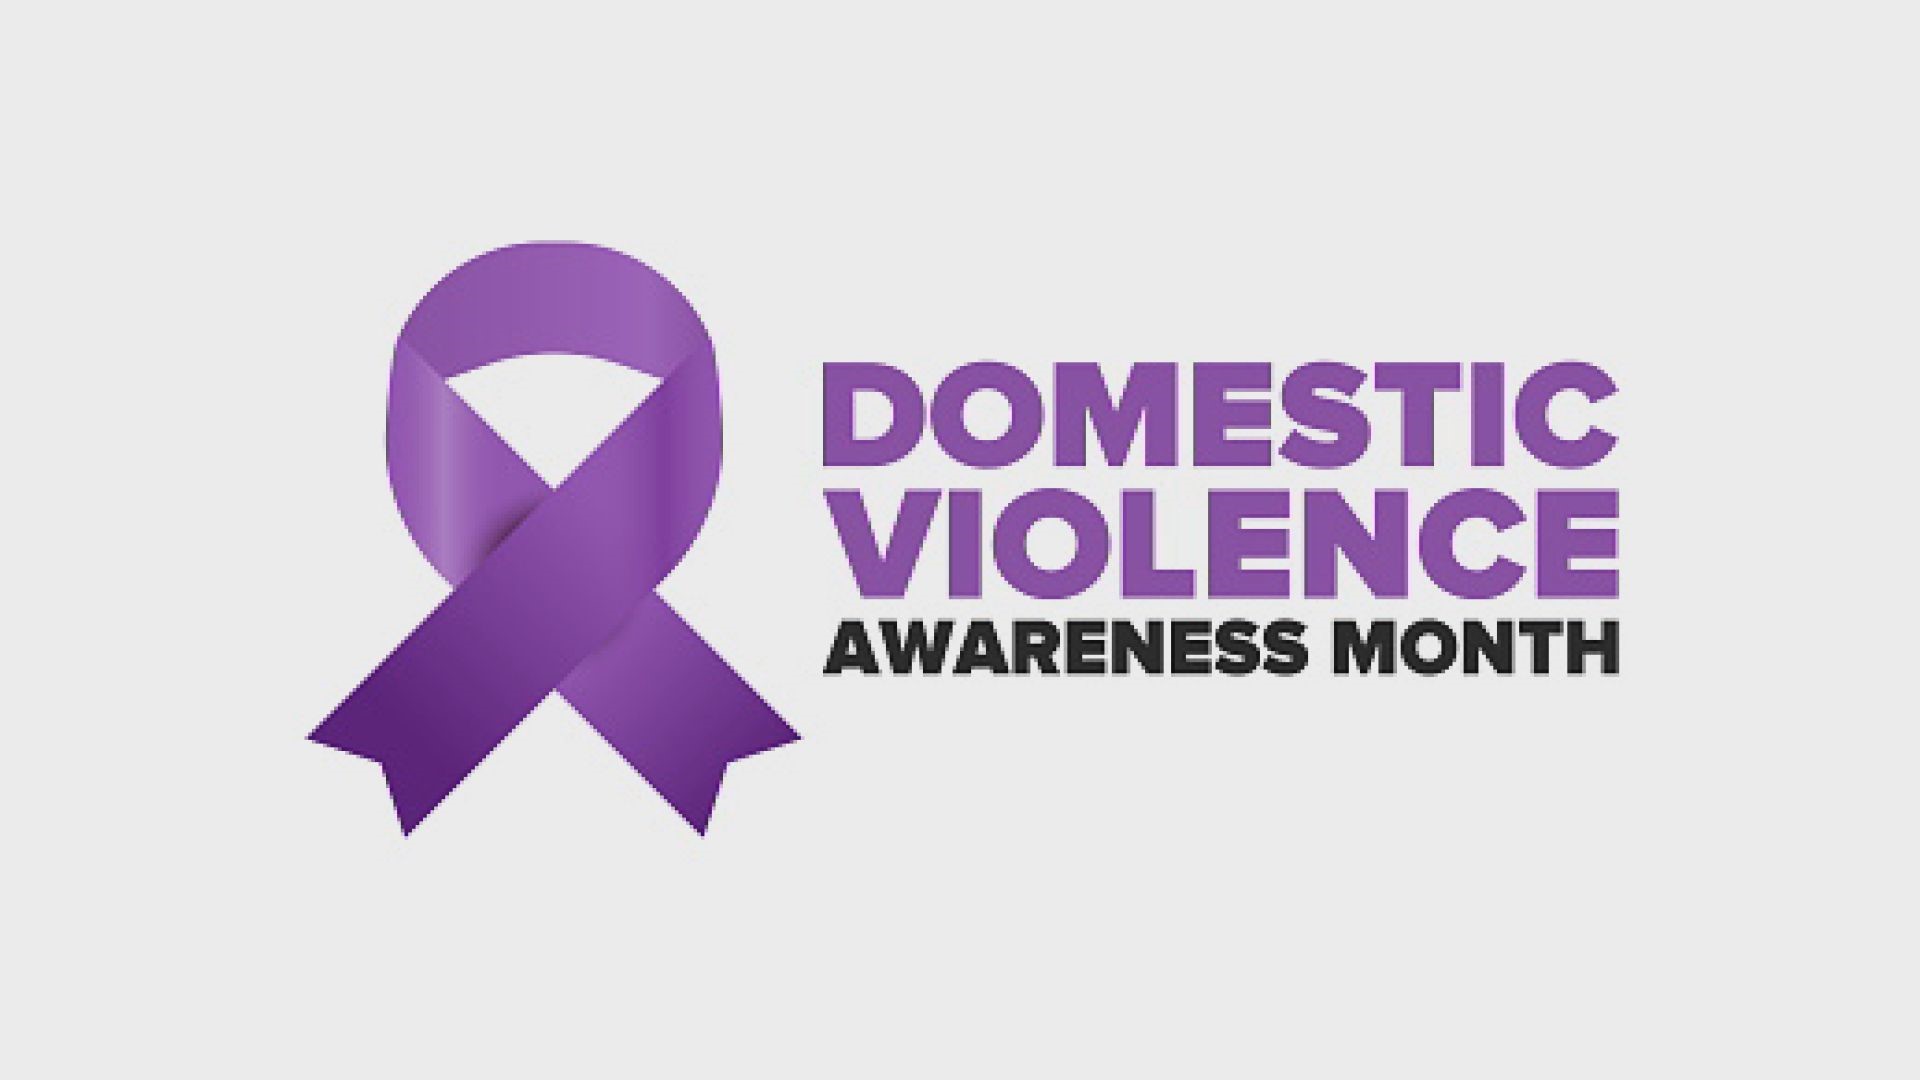 According to the National Coalition Against Domestic violence, 38% of Ohio women and 33% of Ohio men experience some form of physical violence in their lifetimes.